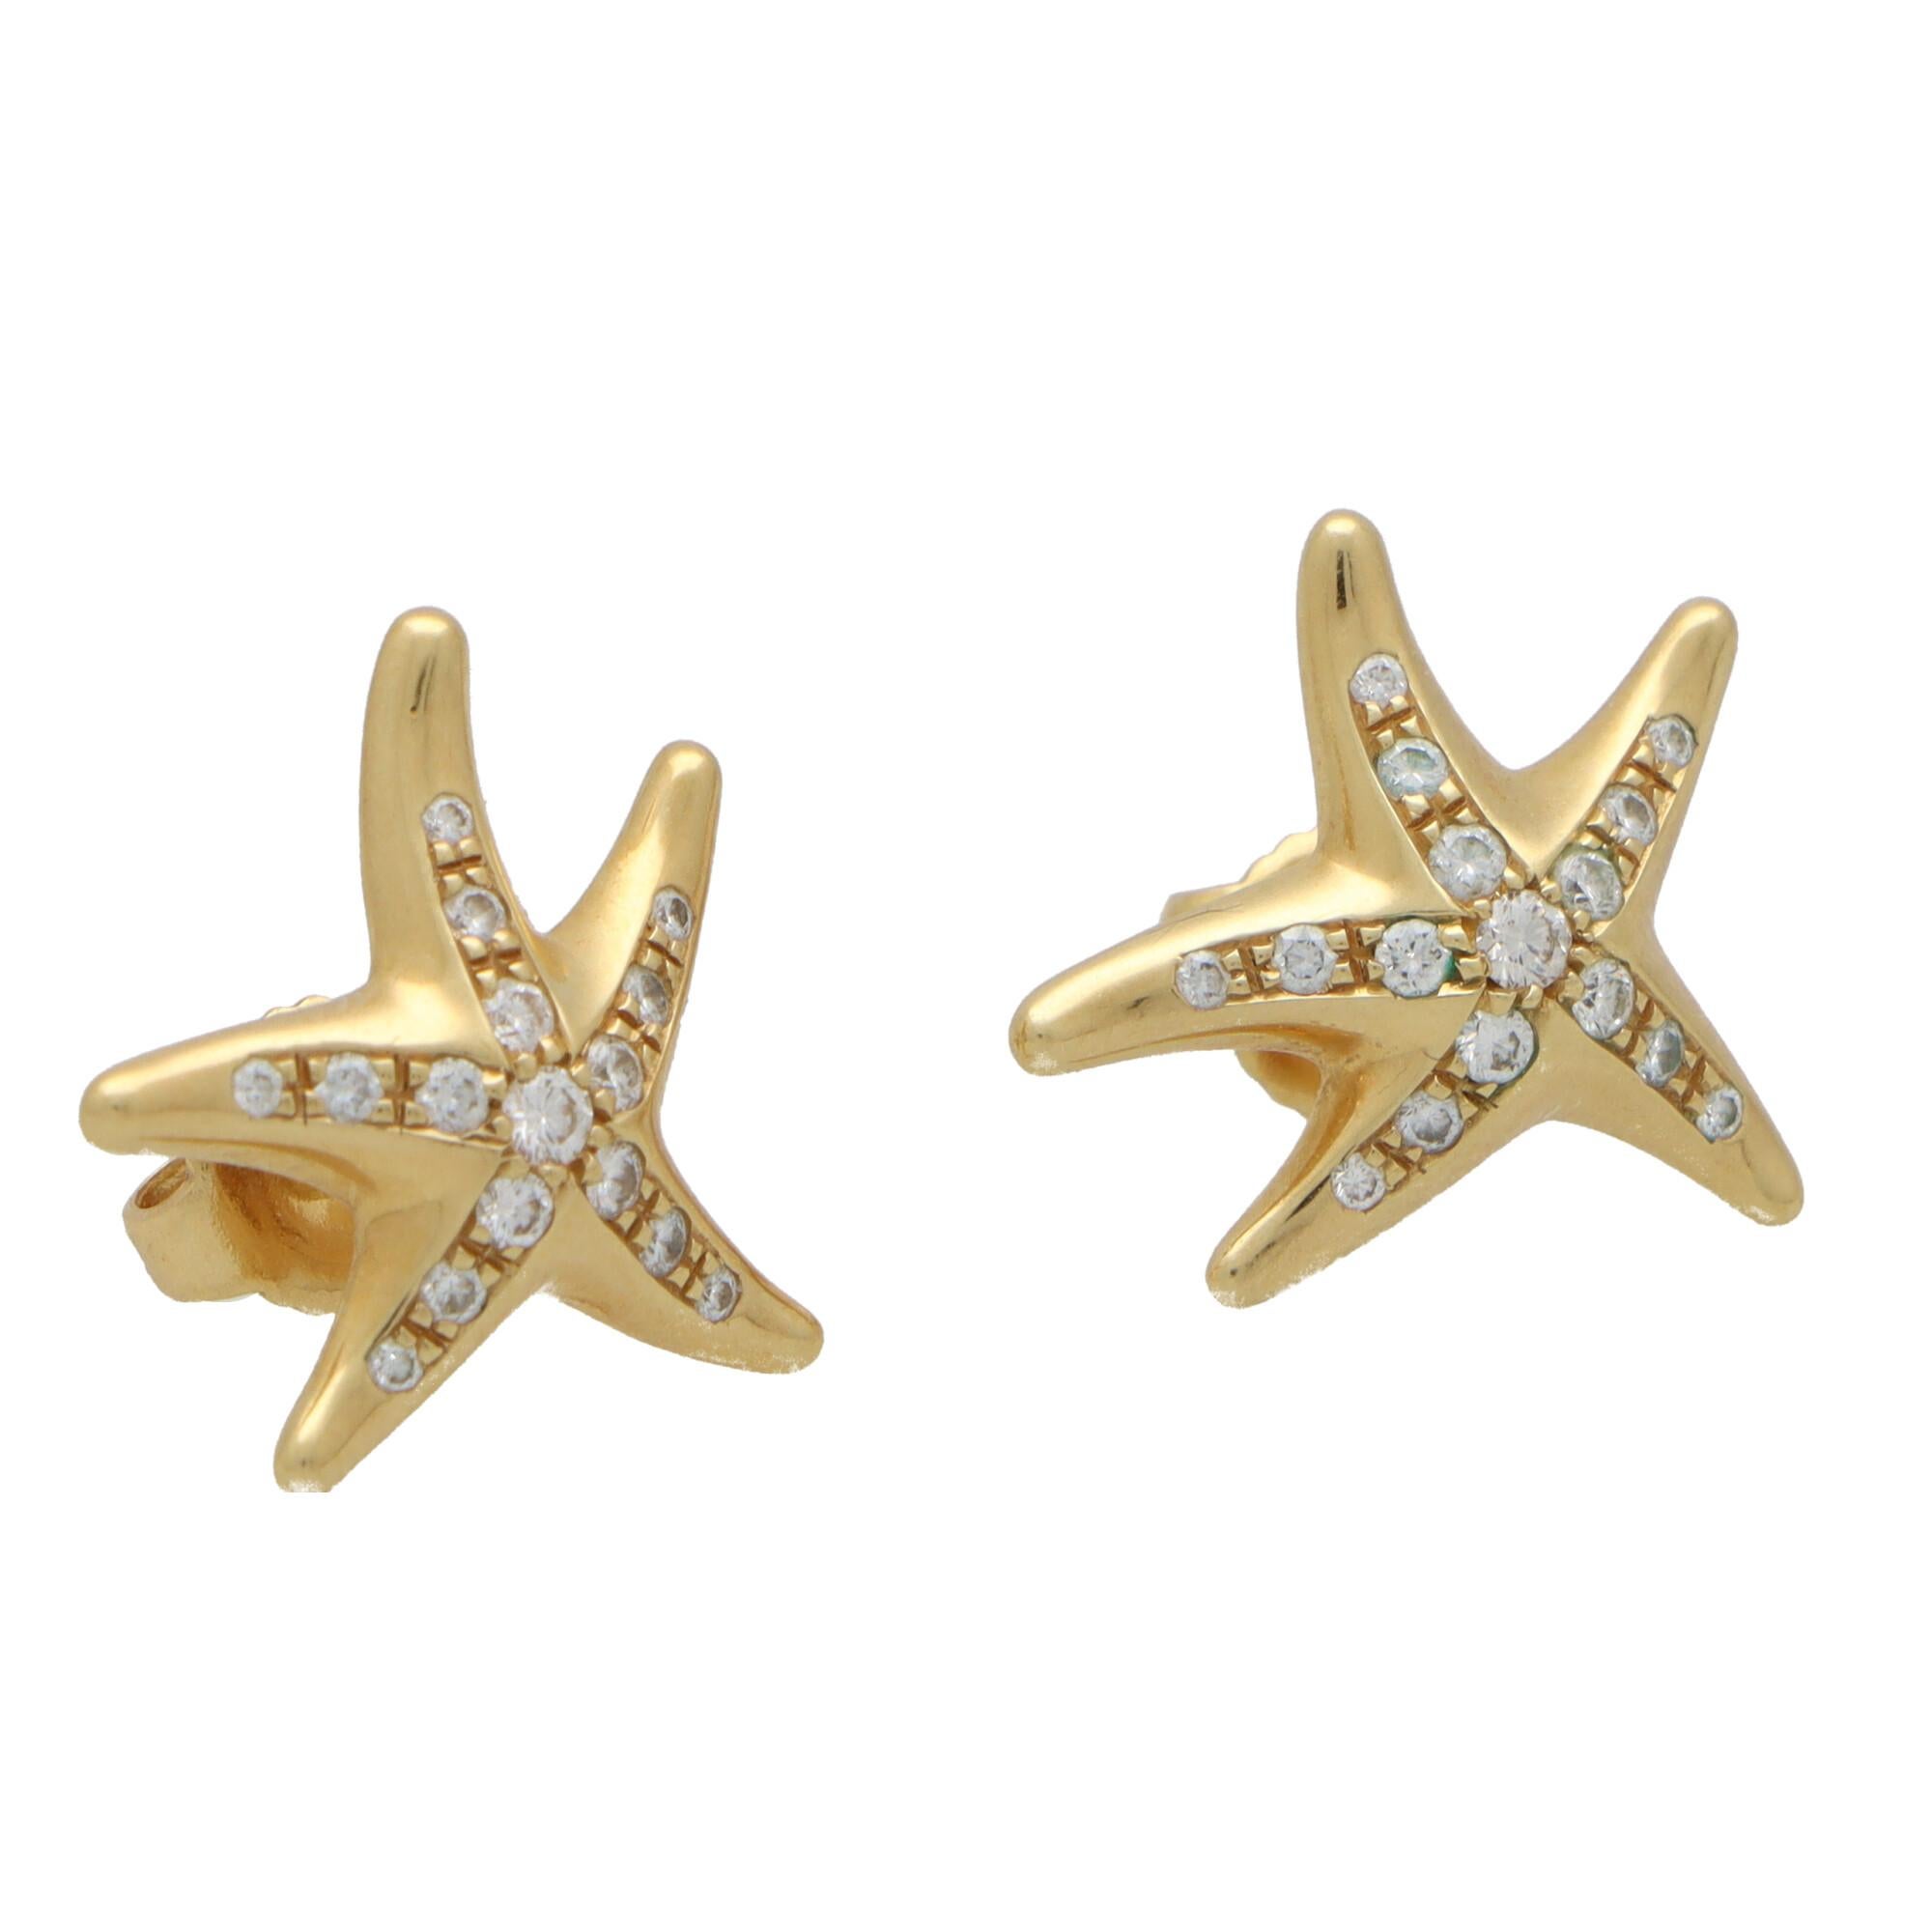 A beautiful pair of vintage Elsa Peretti for Tiffany & Co. diamond starfish earrings set in 18k yellow gold.

From the current Elsa Peretti collection, each earring depicts an elegant starfish pave set to the top with 16 round brilliant cut